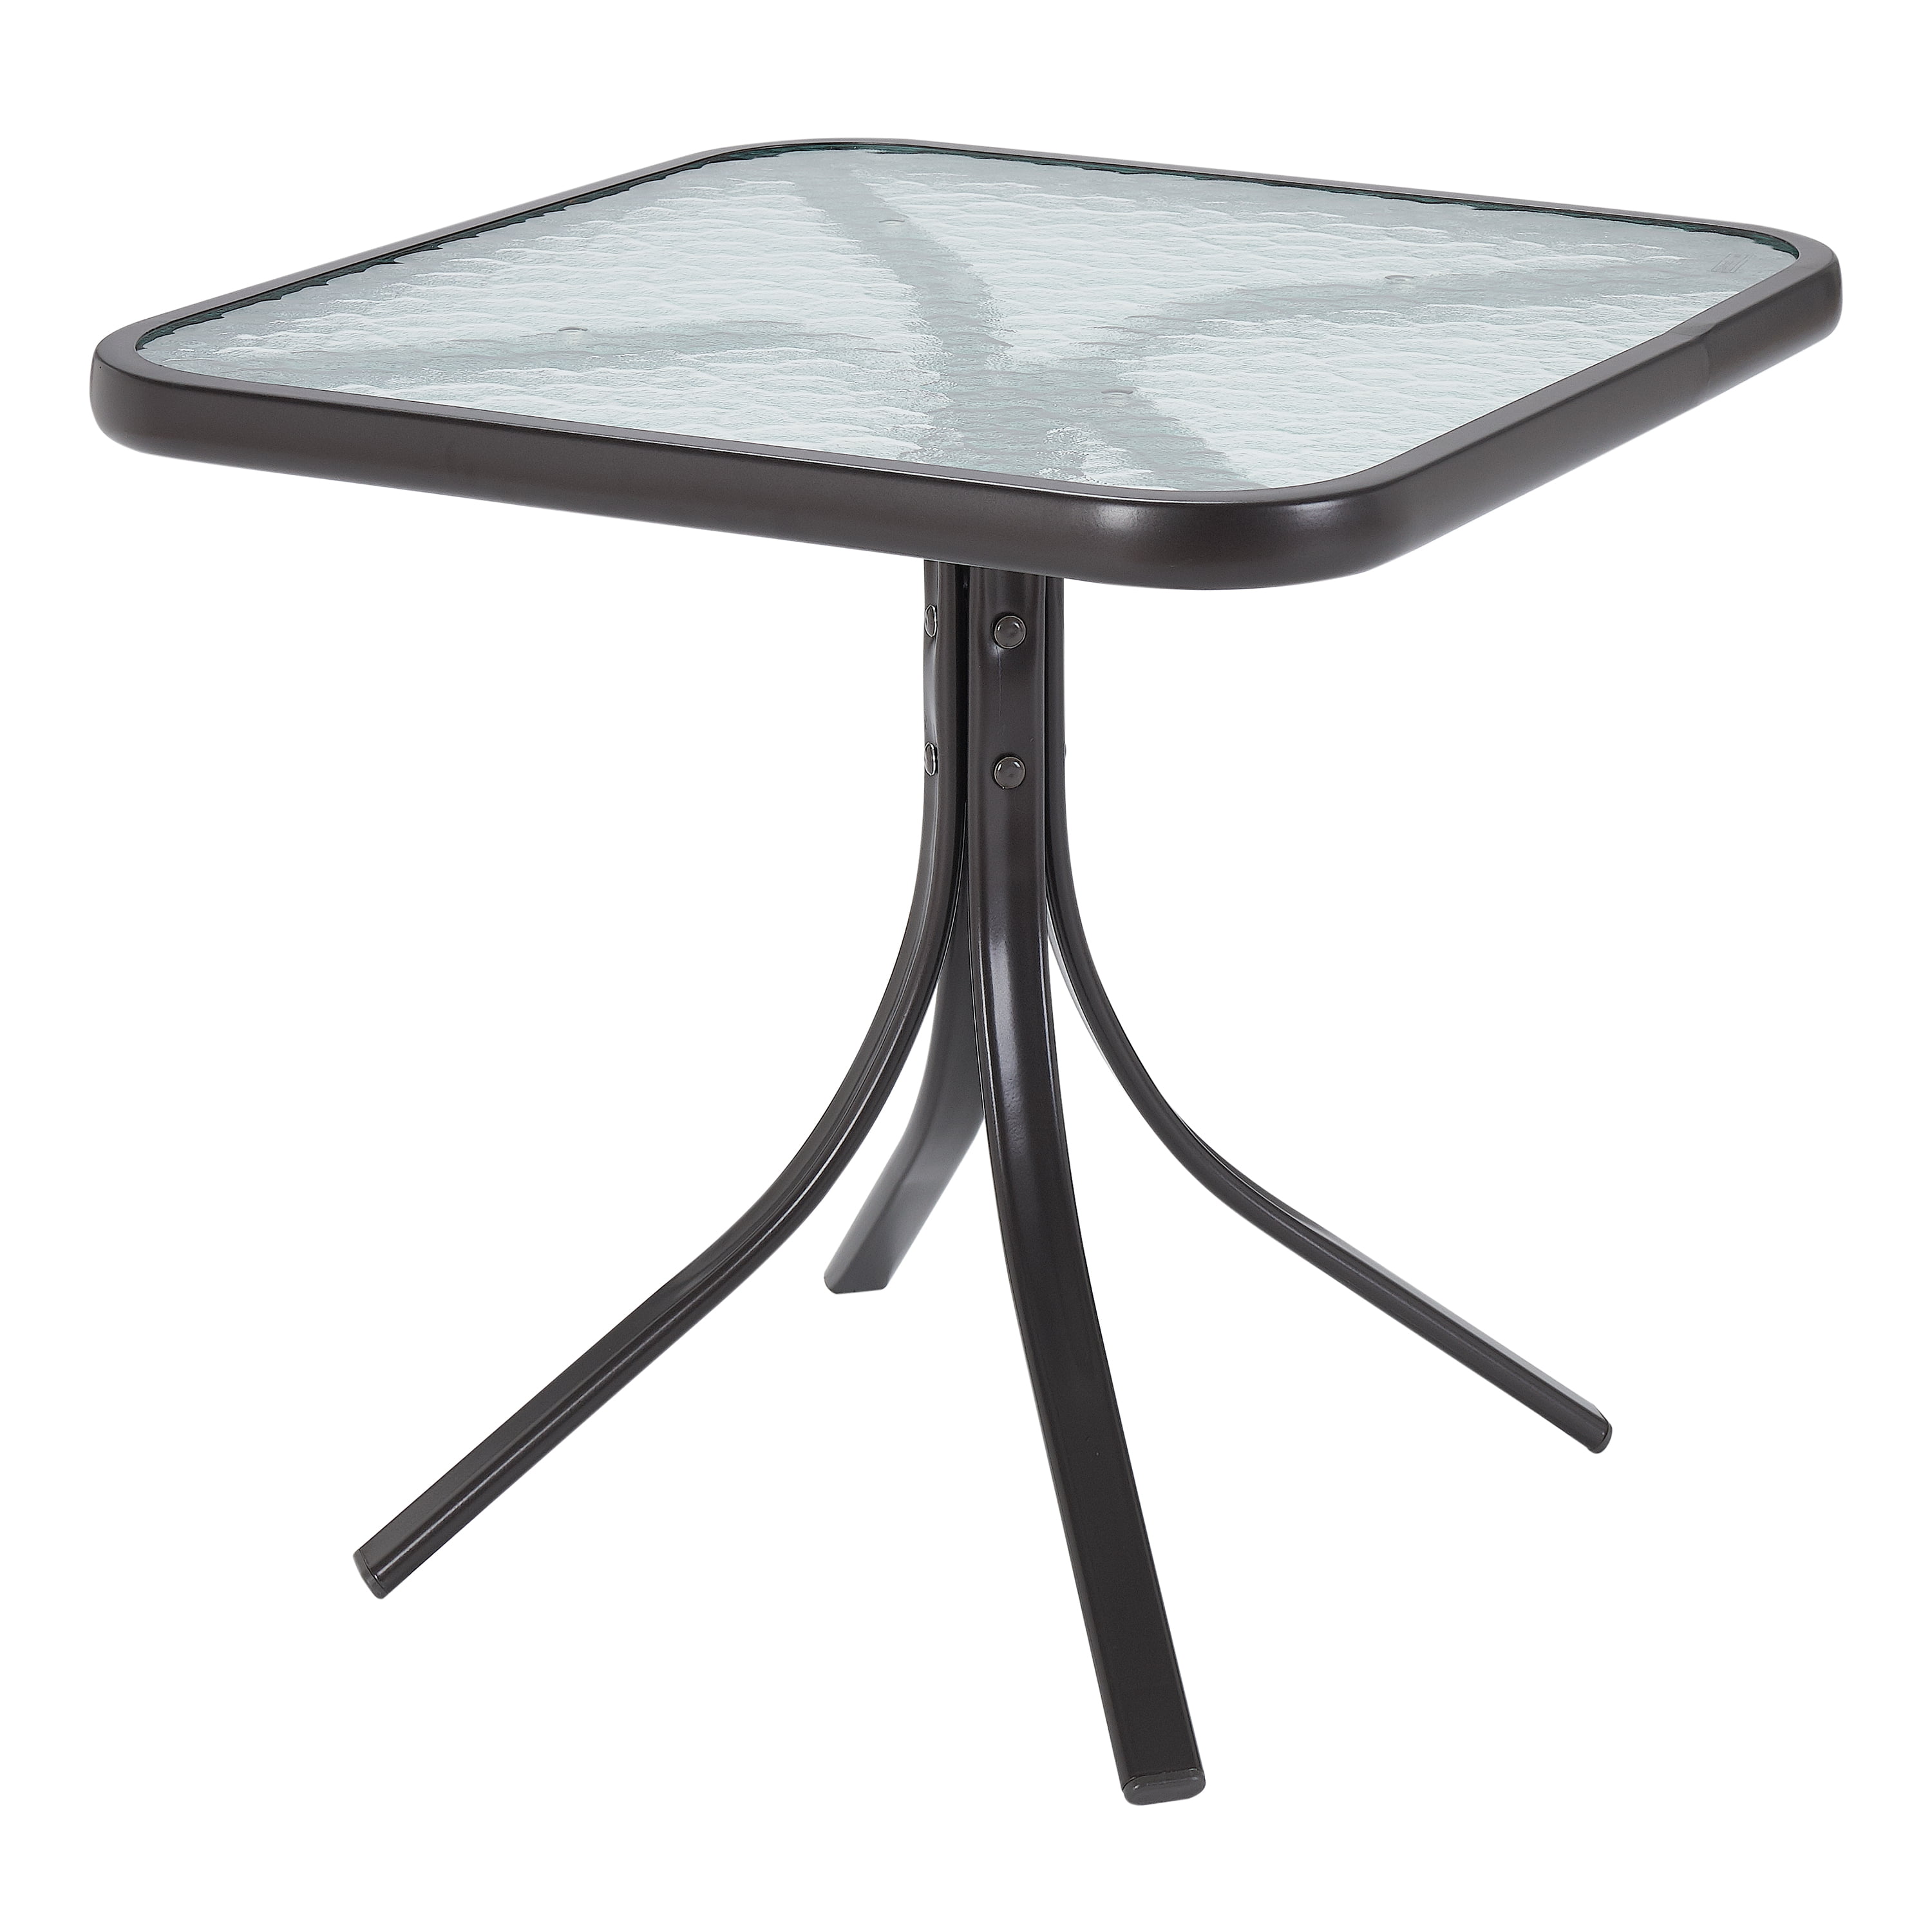 Mainstays Square Glass Patio Table 20 X 20 Dark Brown Finish